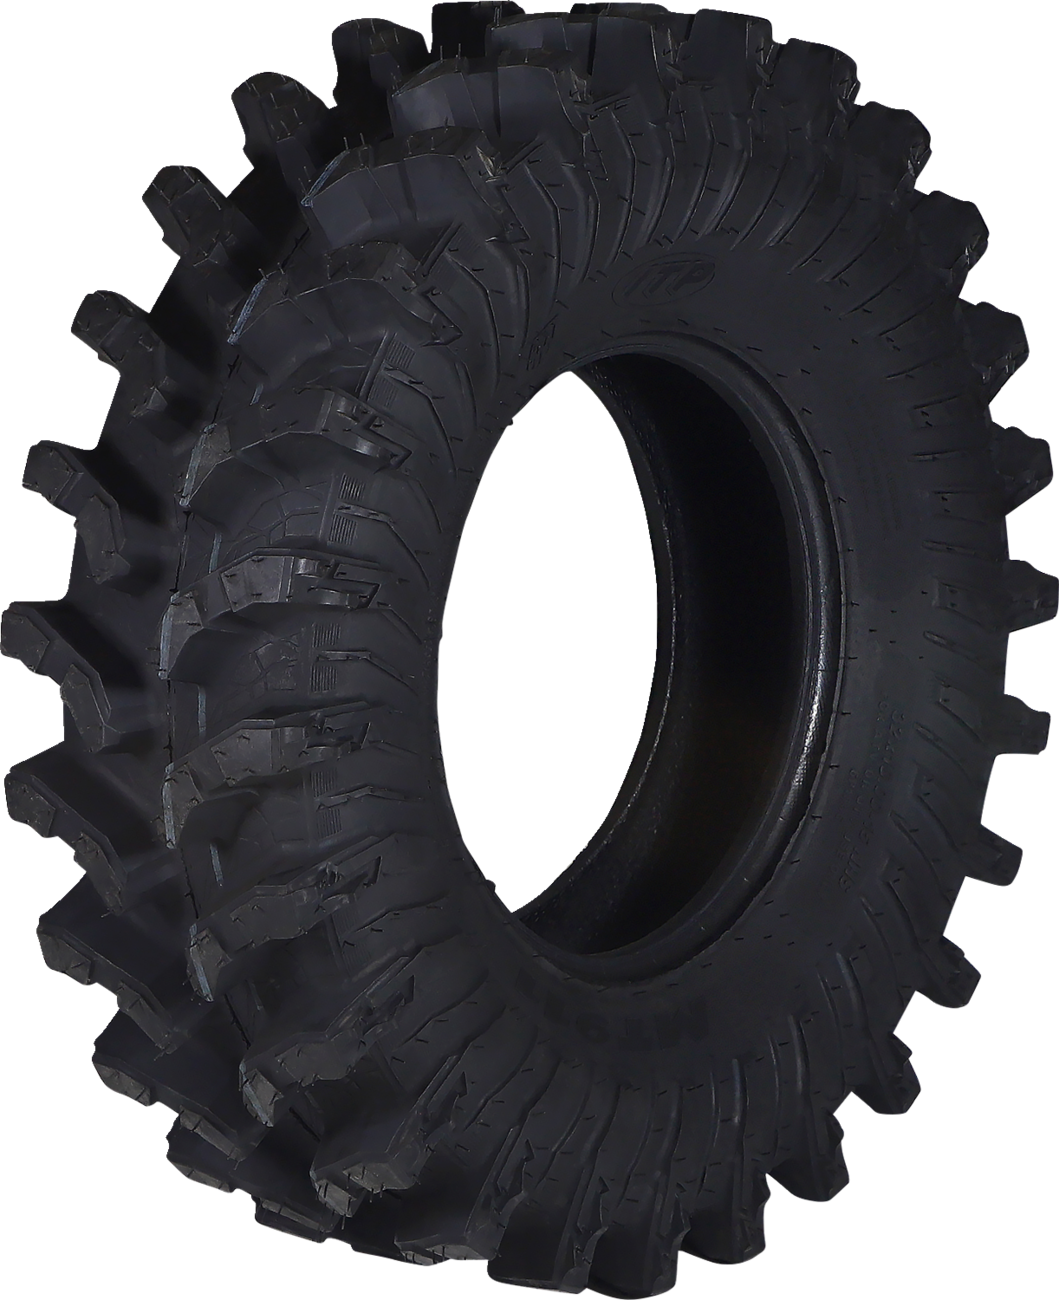 ITP Tire - MT911 - Front/Rear - 30x10-15 - 8 Ply 6P1937